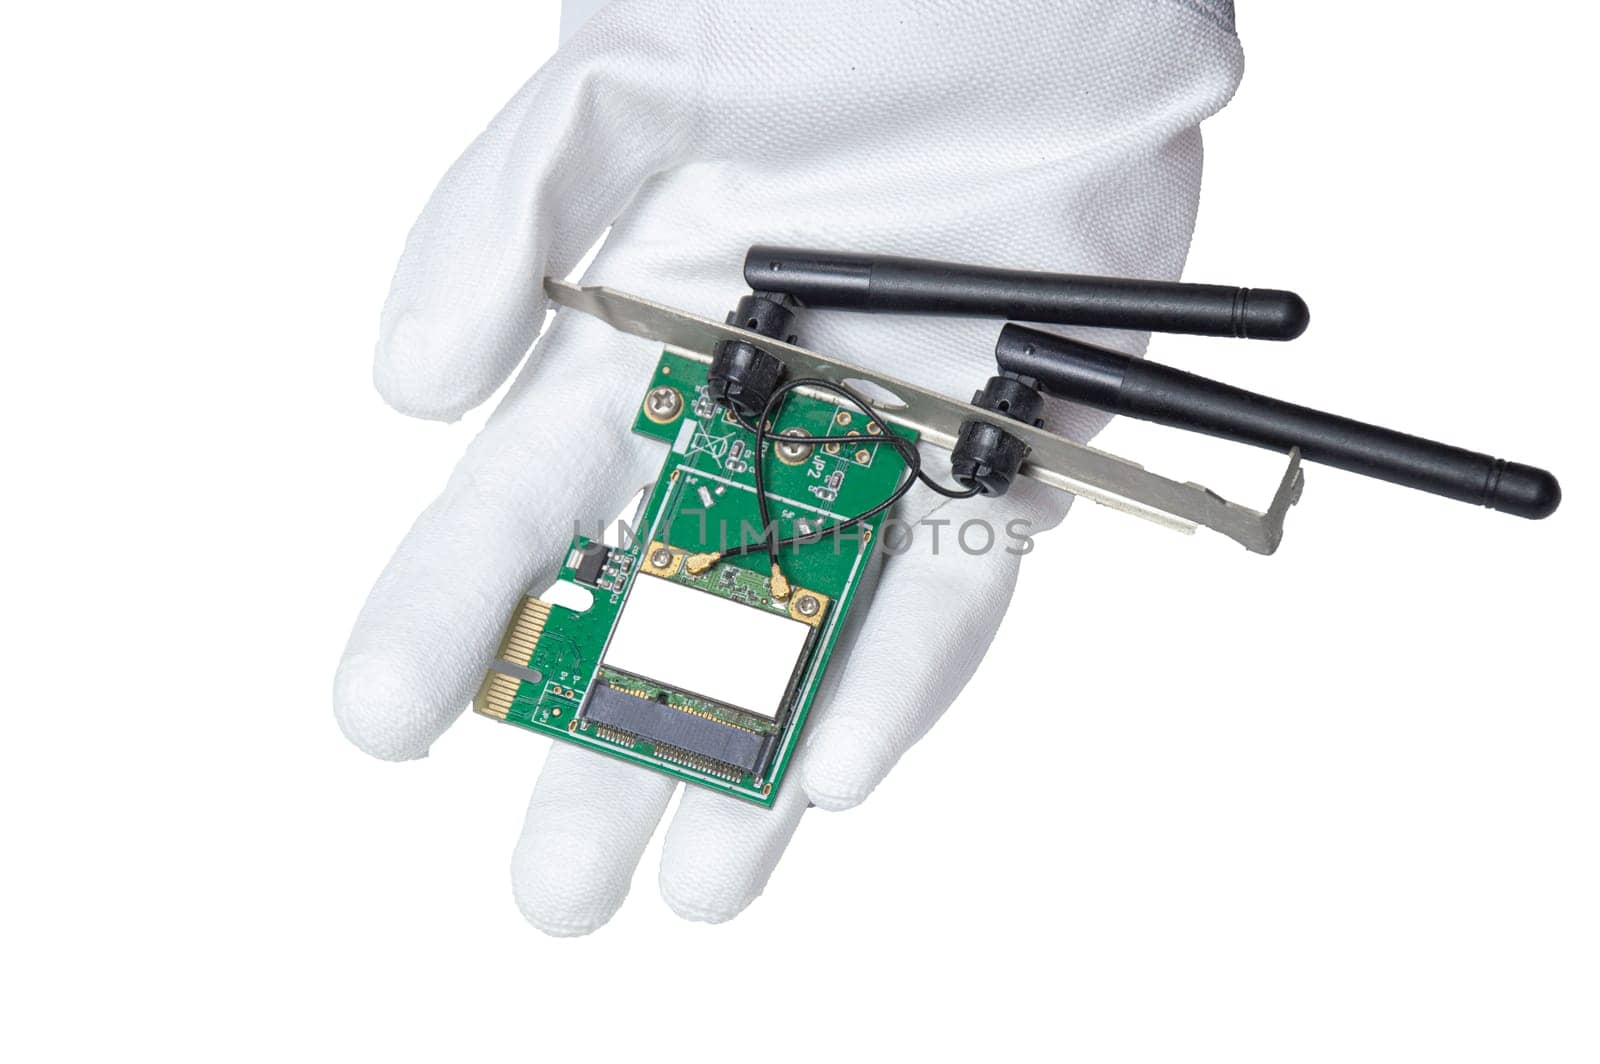 Picture of the device, the wireless receiver in hand. Mounted image type in on a white background by boonruen